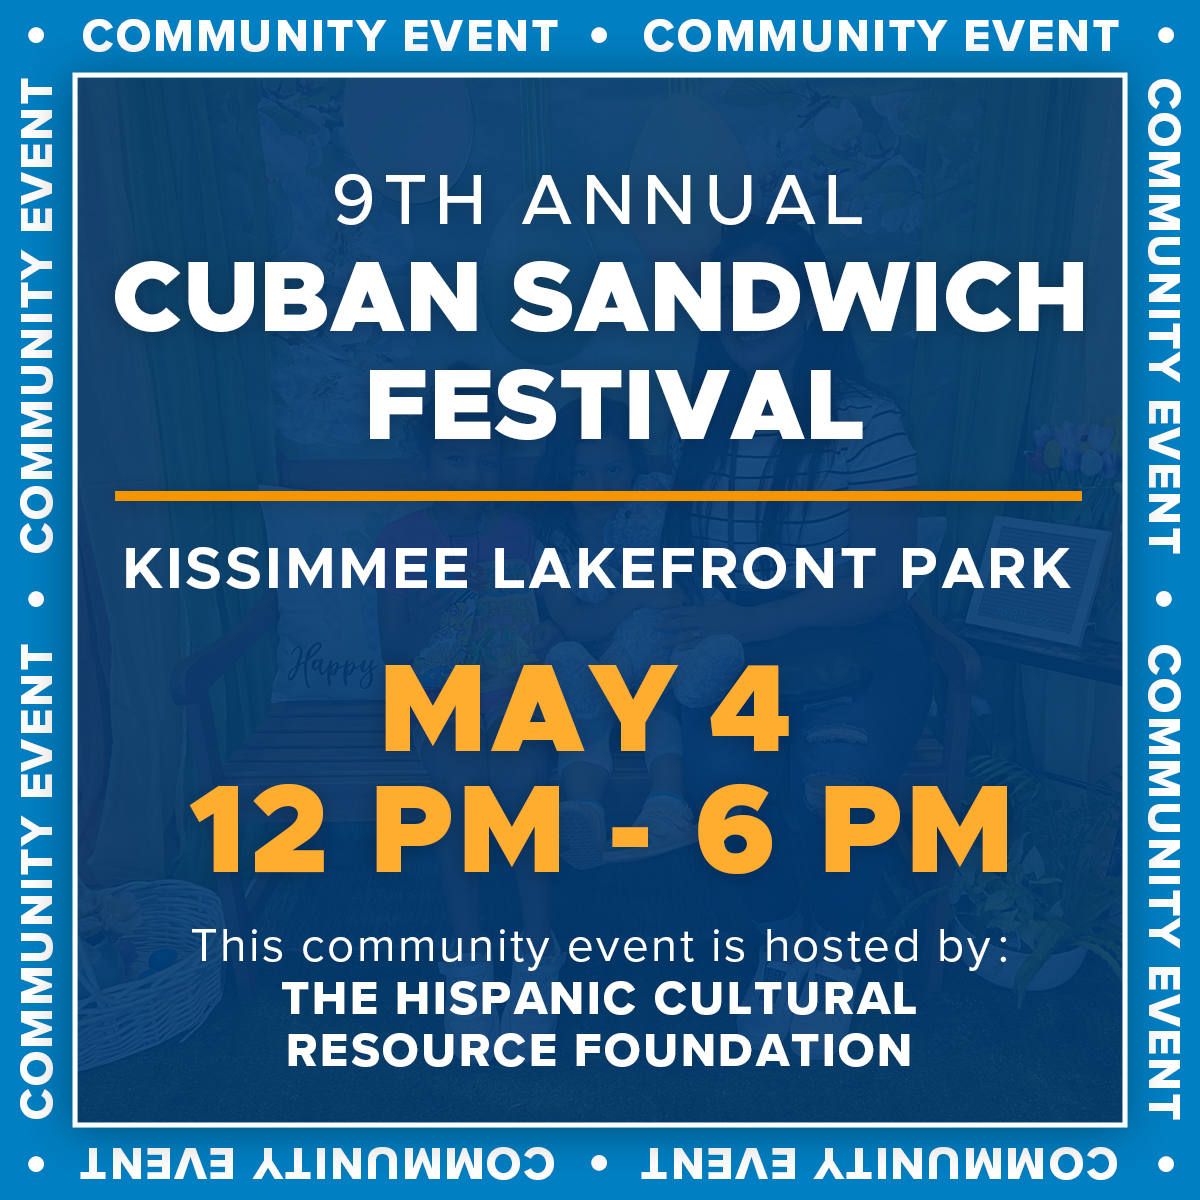 The Cuban Sandwich Festival is a food-filled family event with local vendors, live music, and fun activities for everyone! 🗓️ May 4 • 12 pm -6 pm 📍 Kissimmee Lakefront Park 📝 Hosted by the Hispanic Cultural Resource Foundation